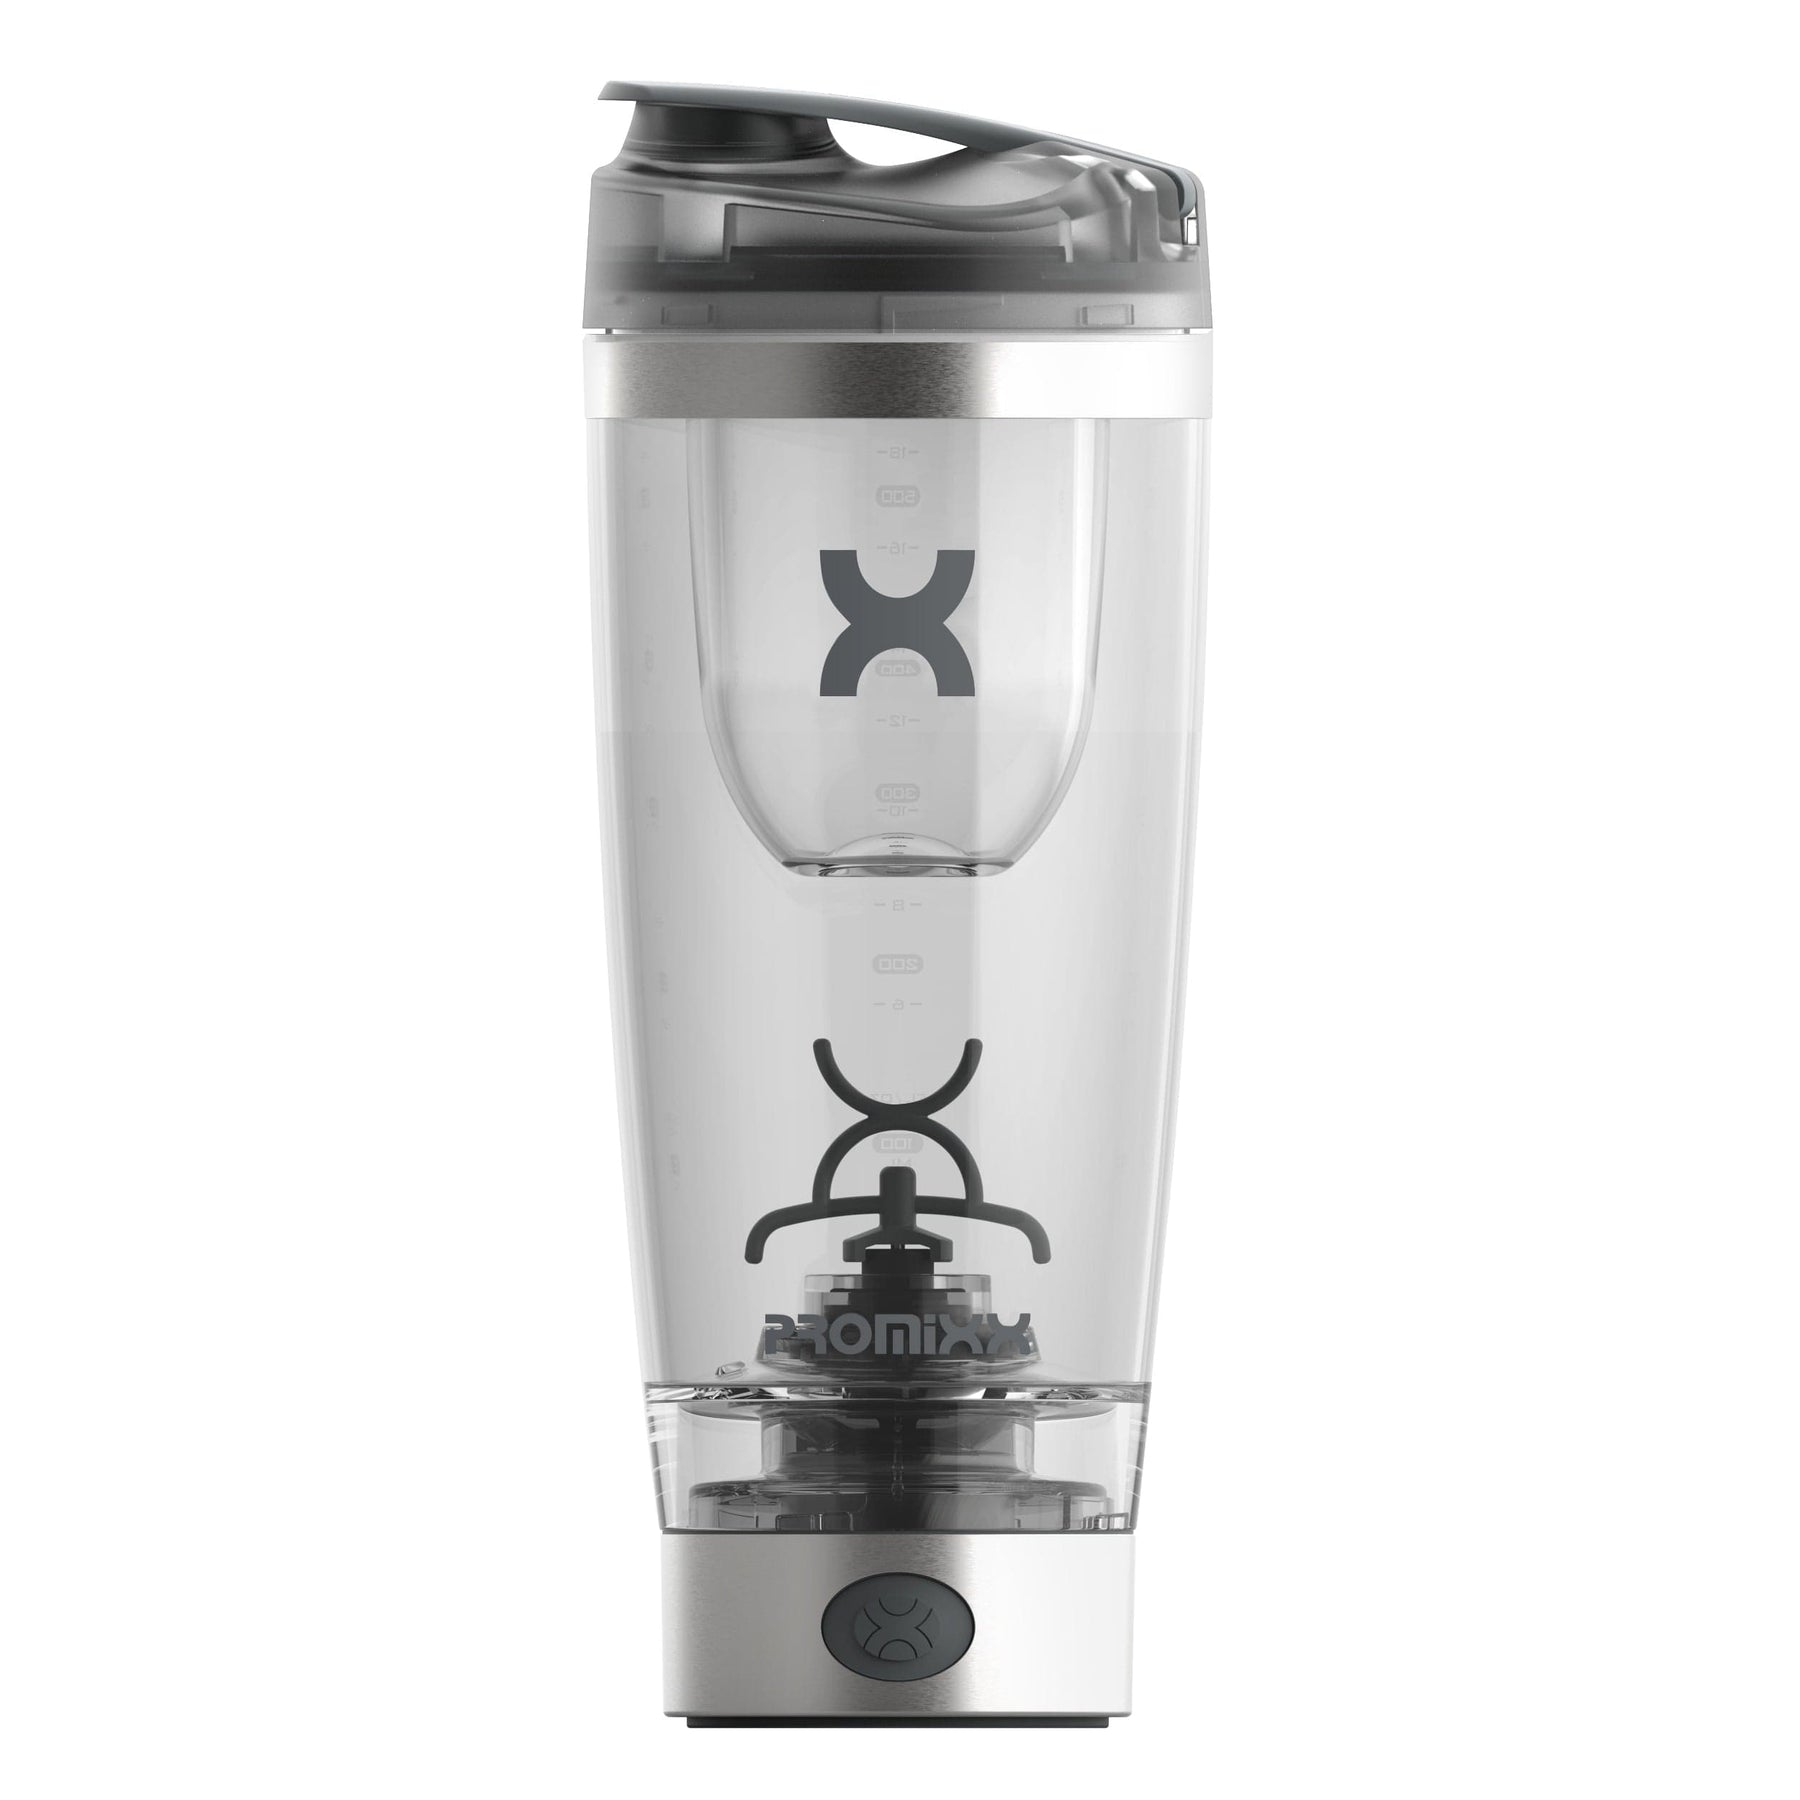 PROMiXX PRO Electric Shaker Bottle – Silver White/Gray, Stainless Steel  Trim, 20oz Cup